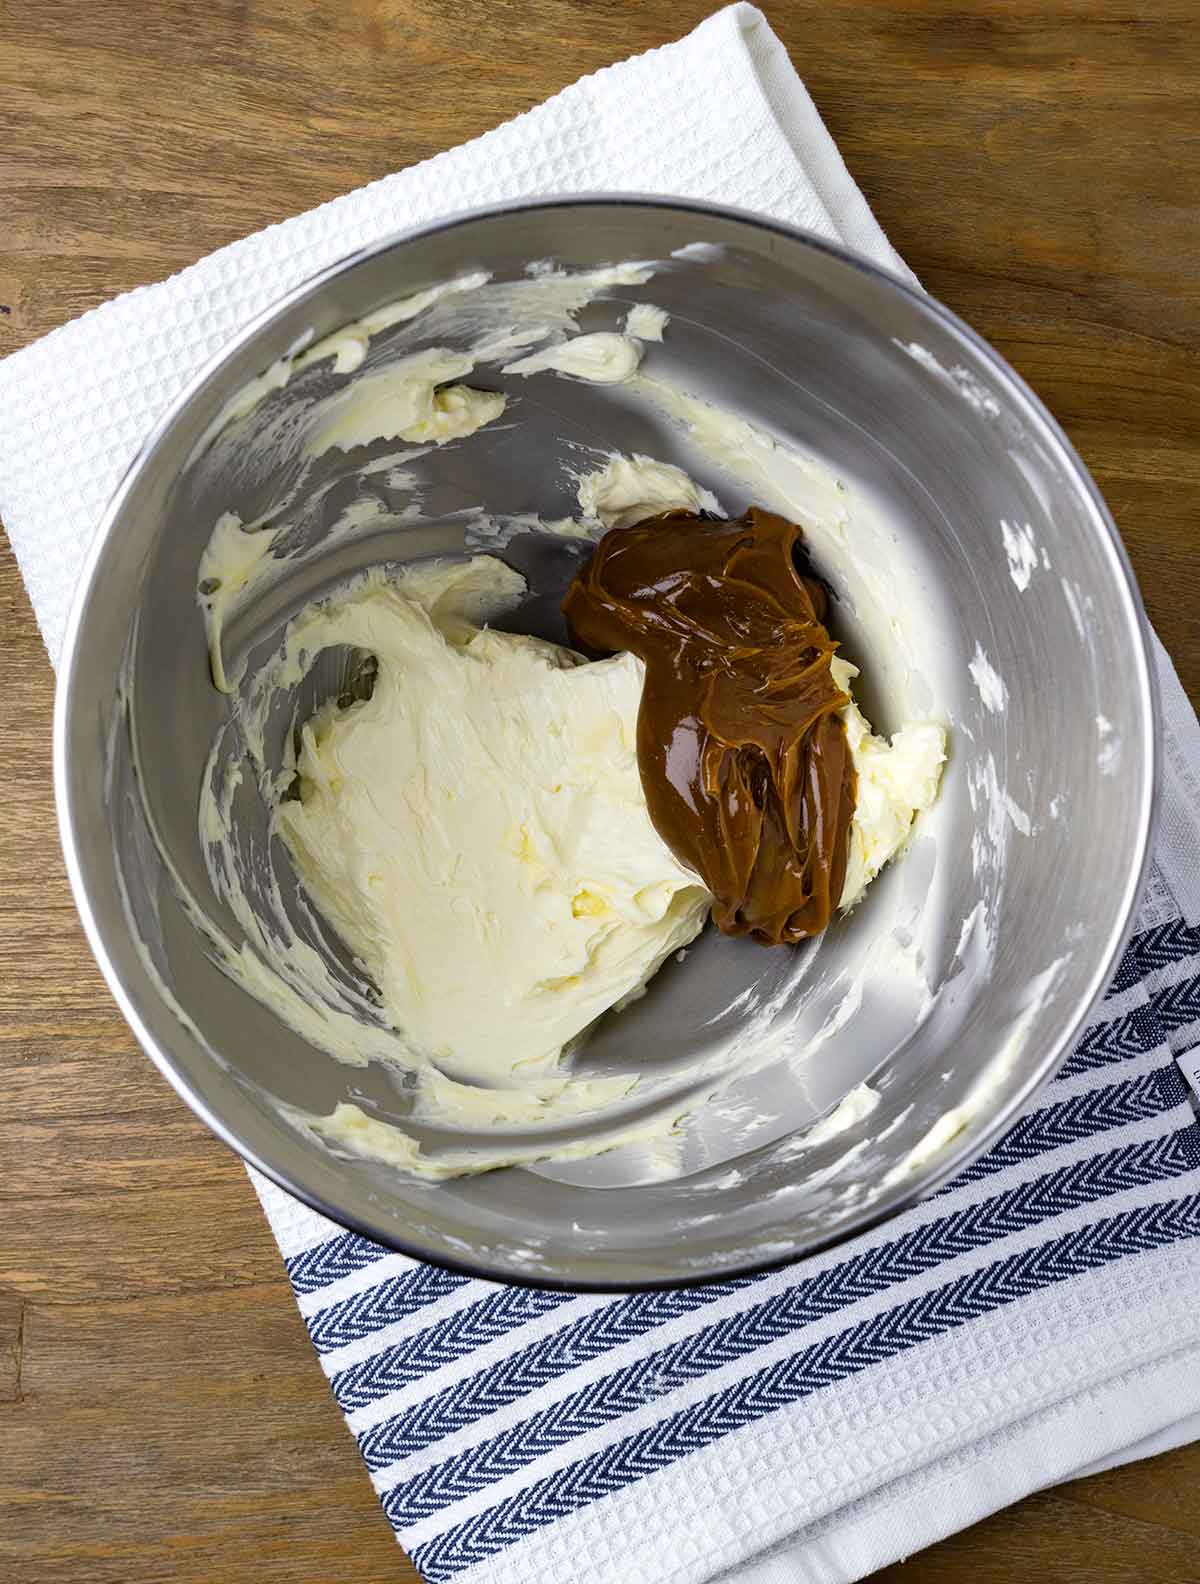 Dulce de leche and creamed butter in a bowl.